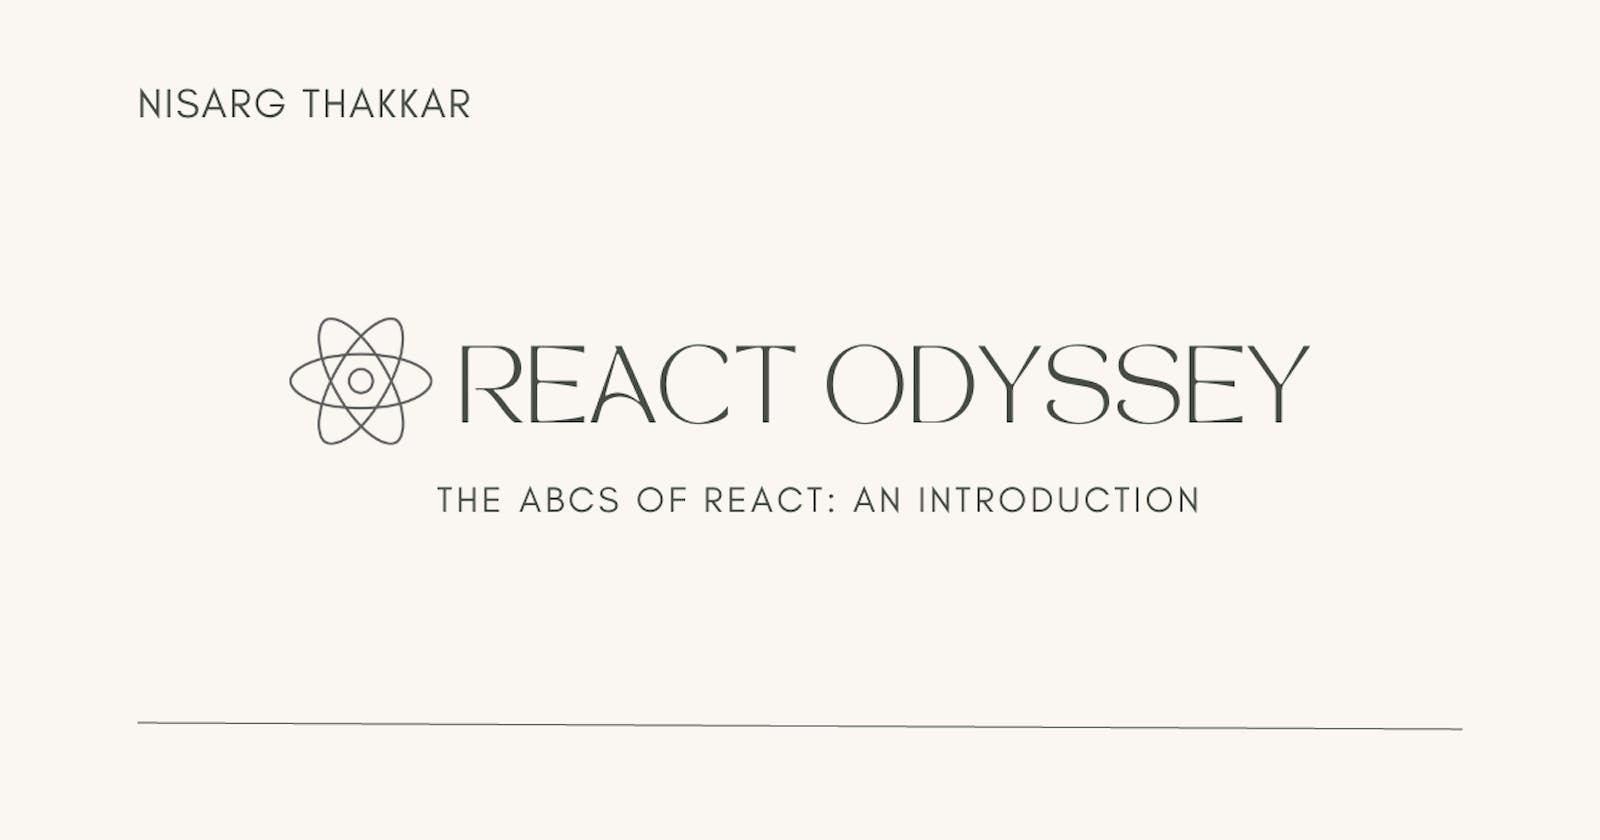 The ABCs of React: An Introduction